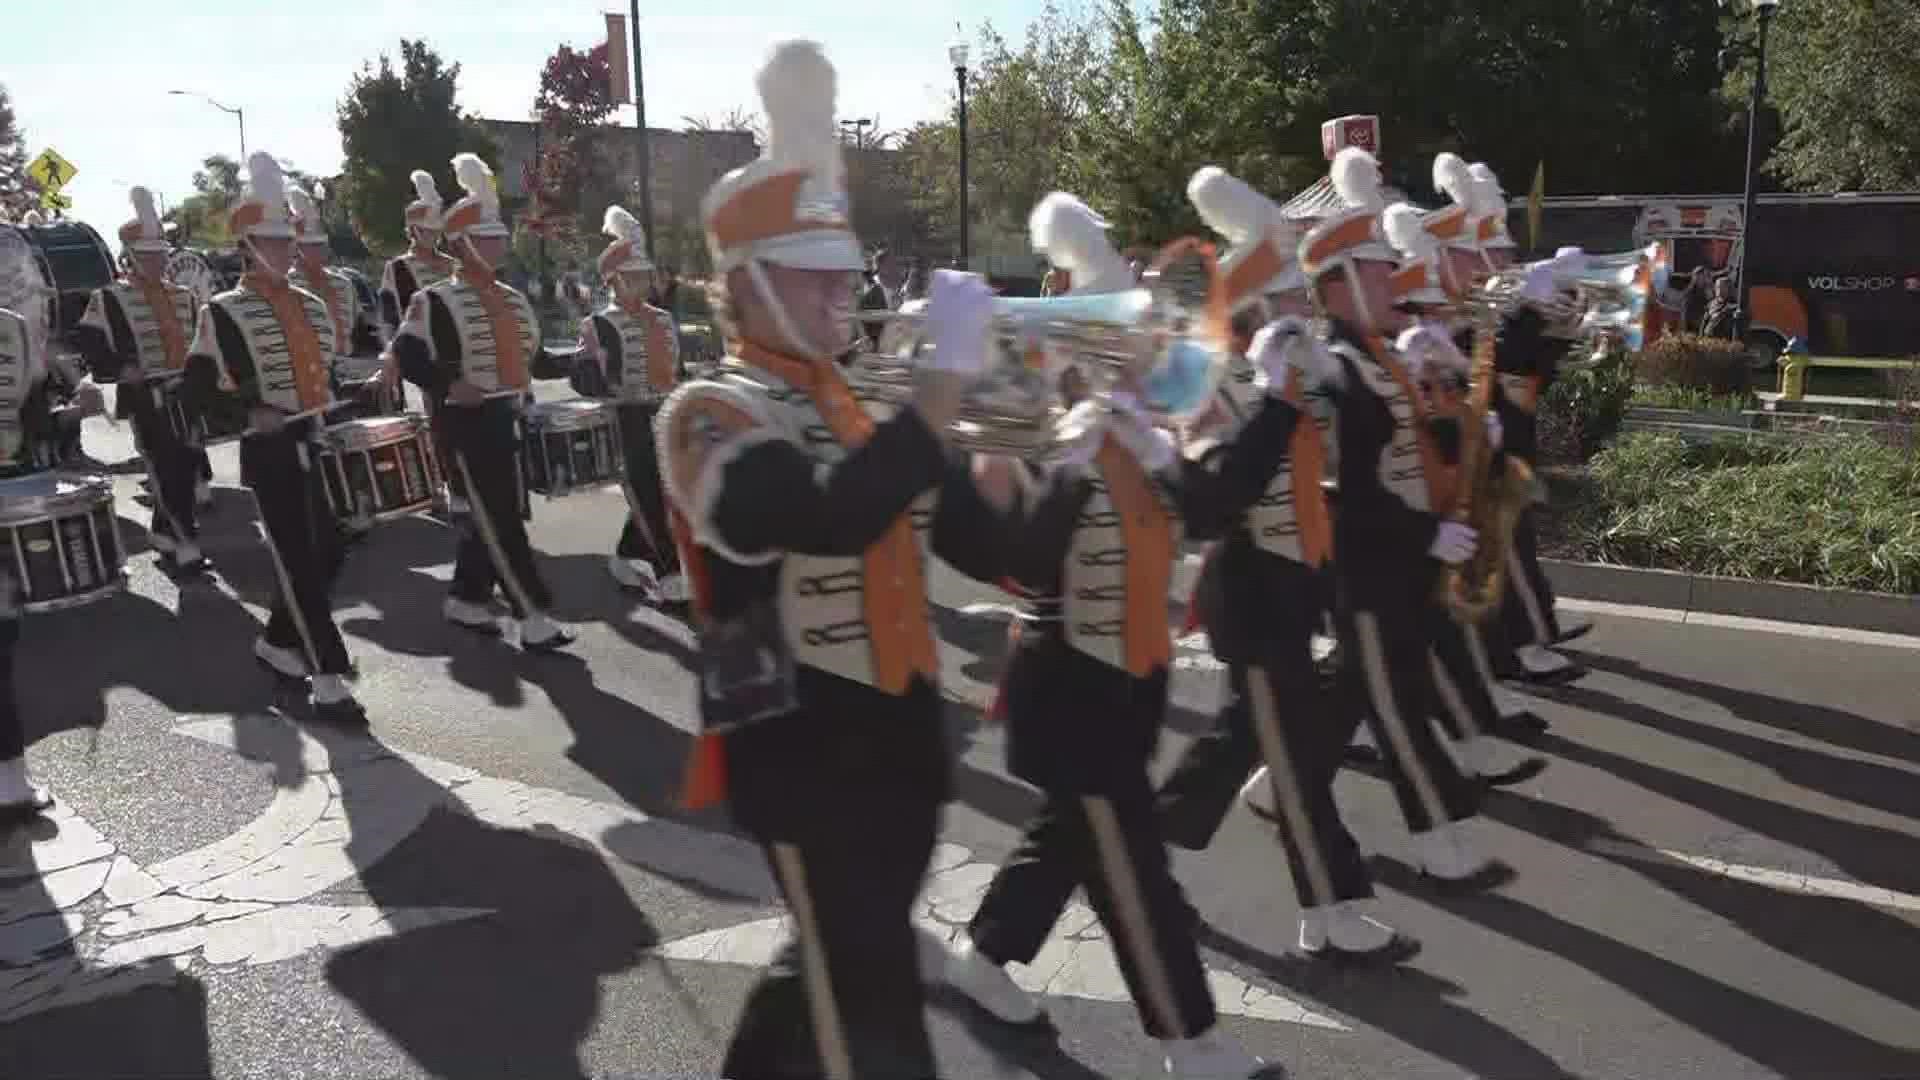 Homecoming celebrations begin with a parade on UT Campus. The theme of this year's parade is "Salute to Smokey"